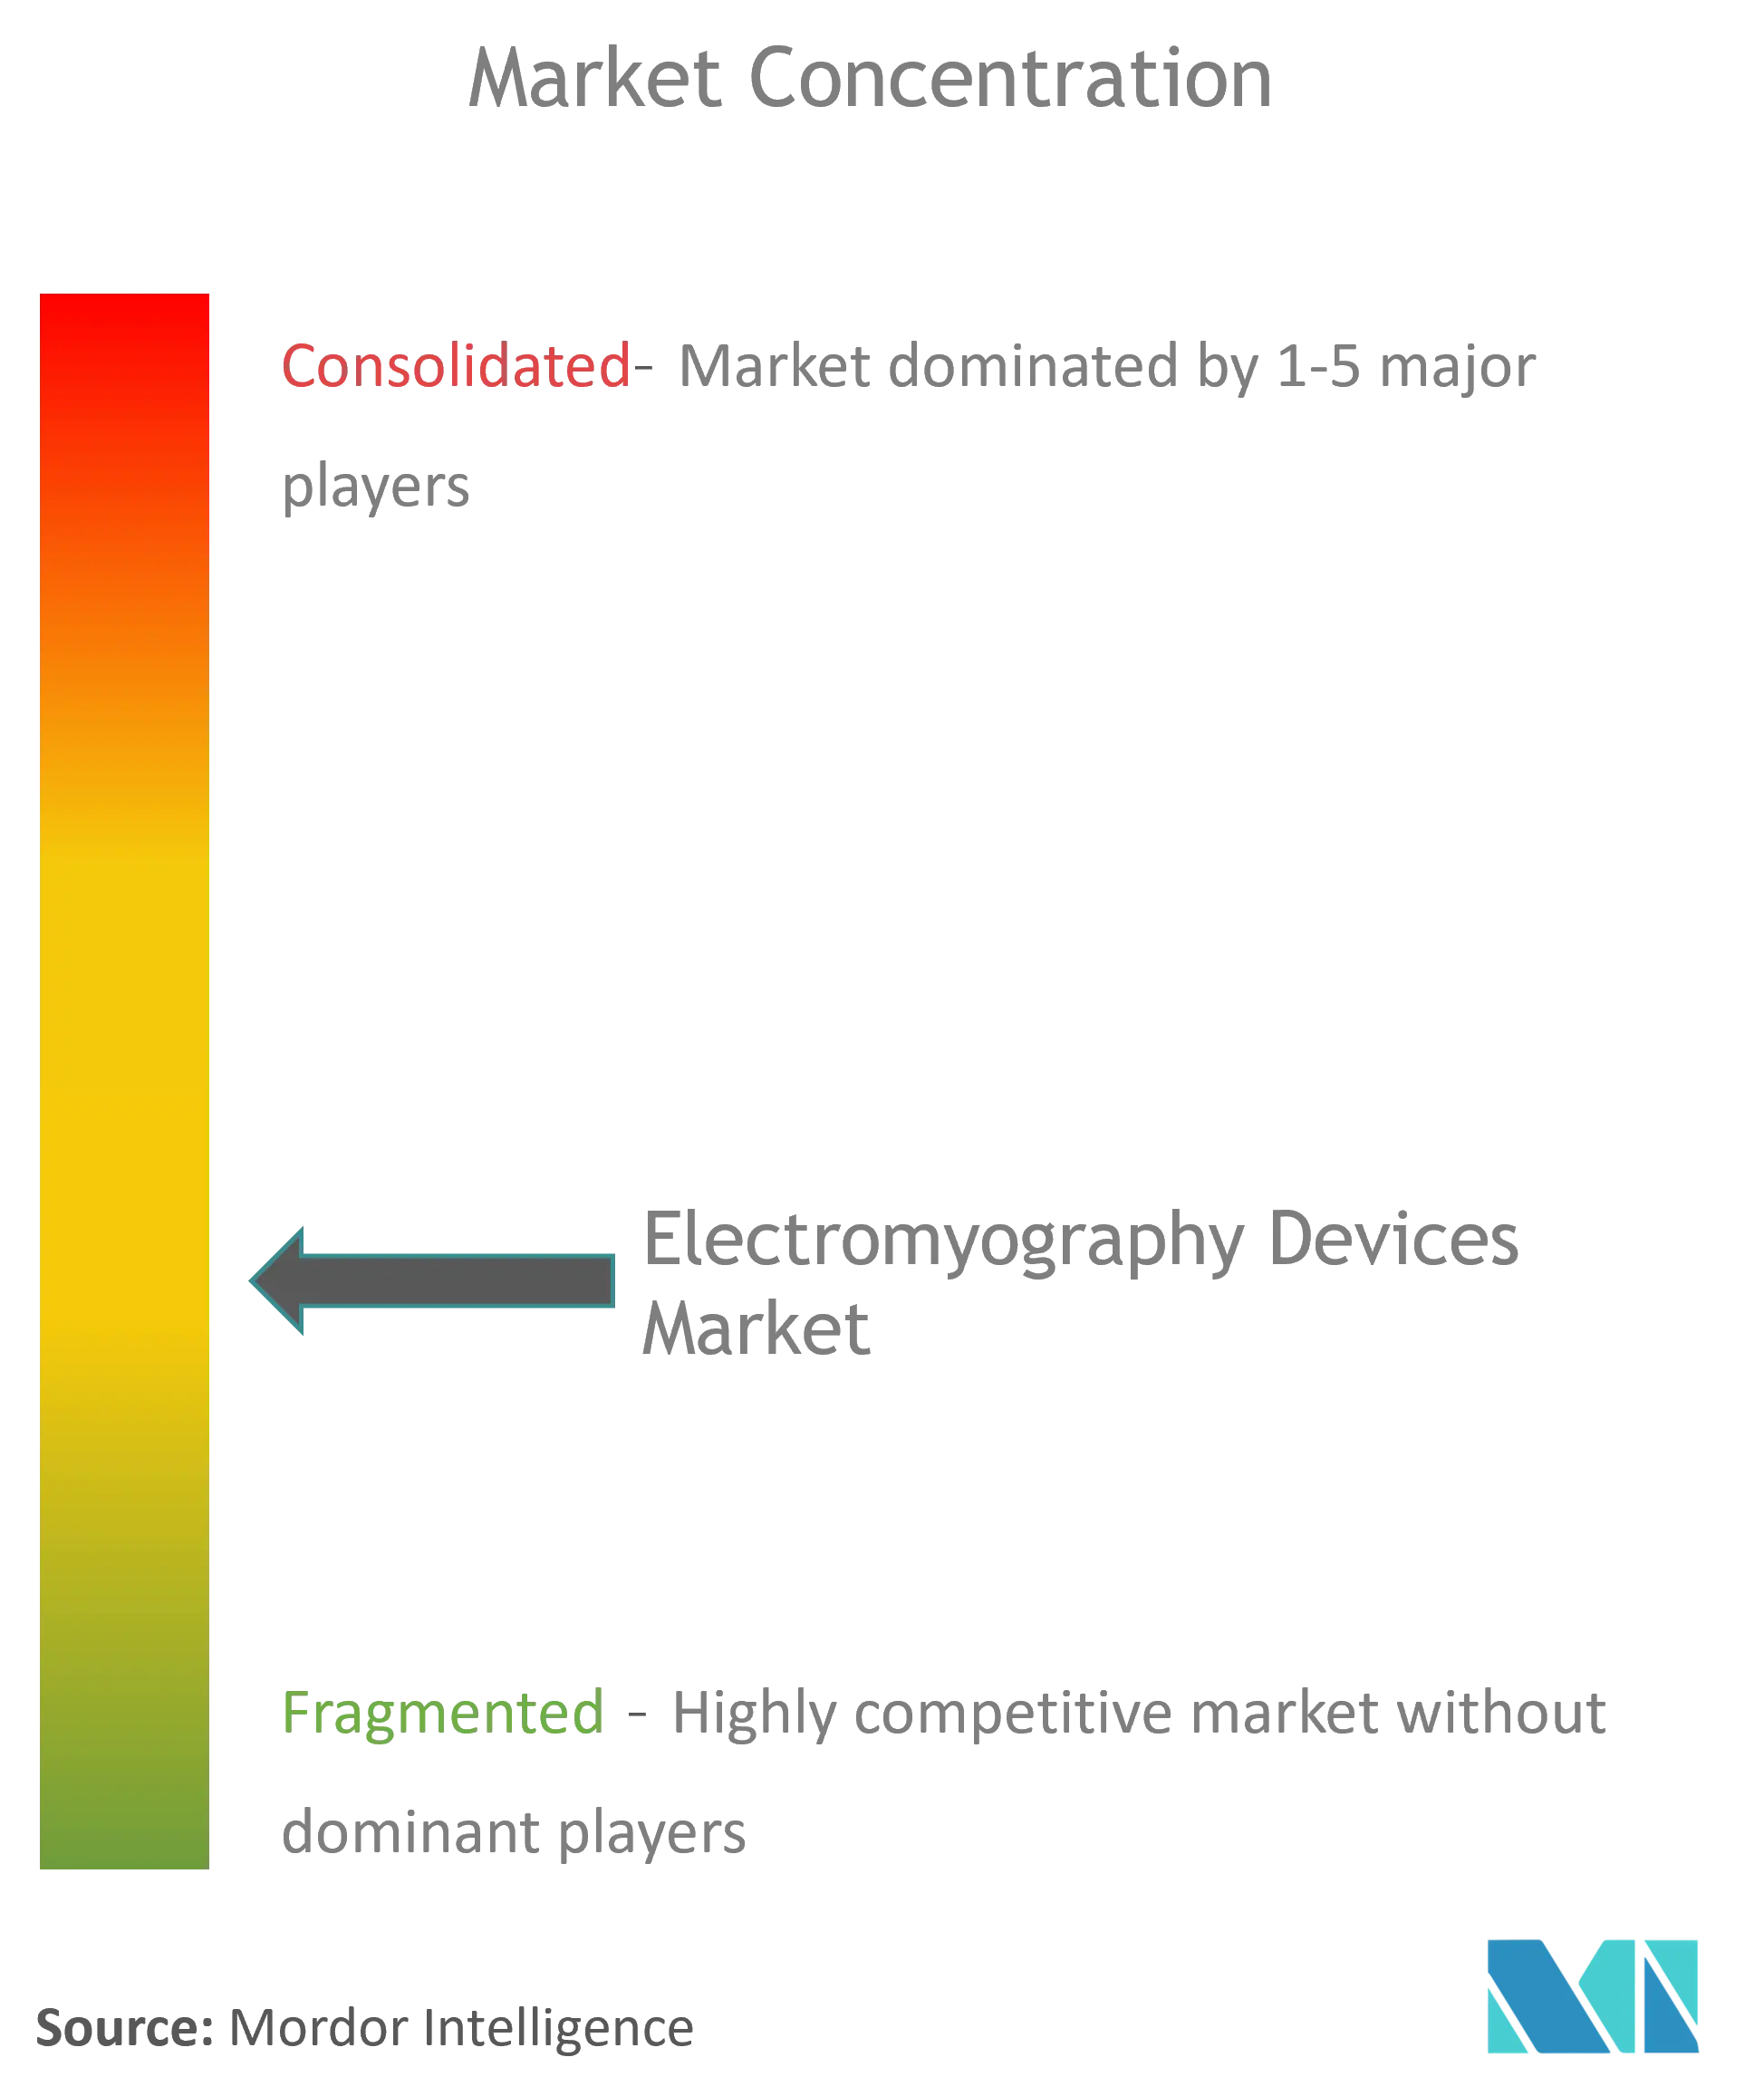 Global Electromyography Devices Market Concentration